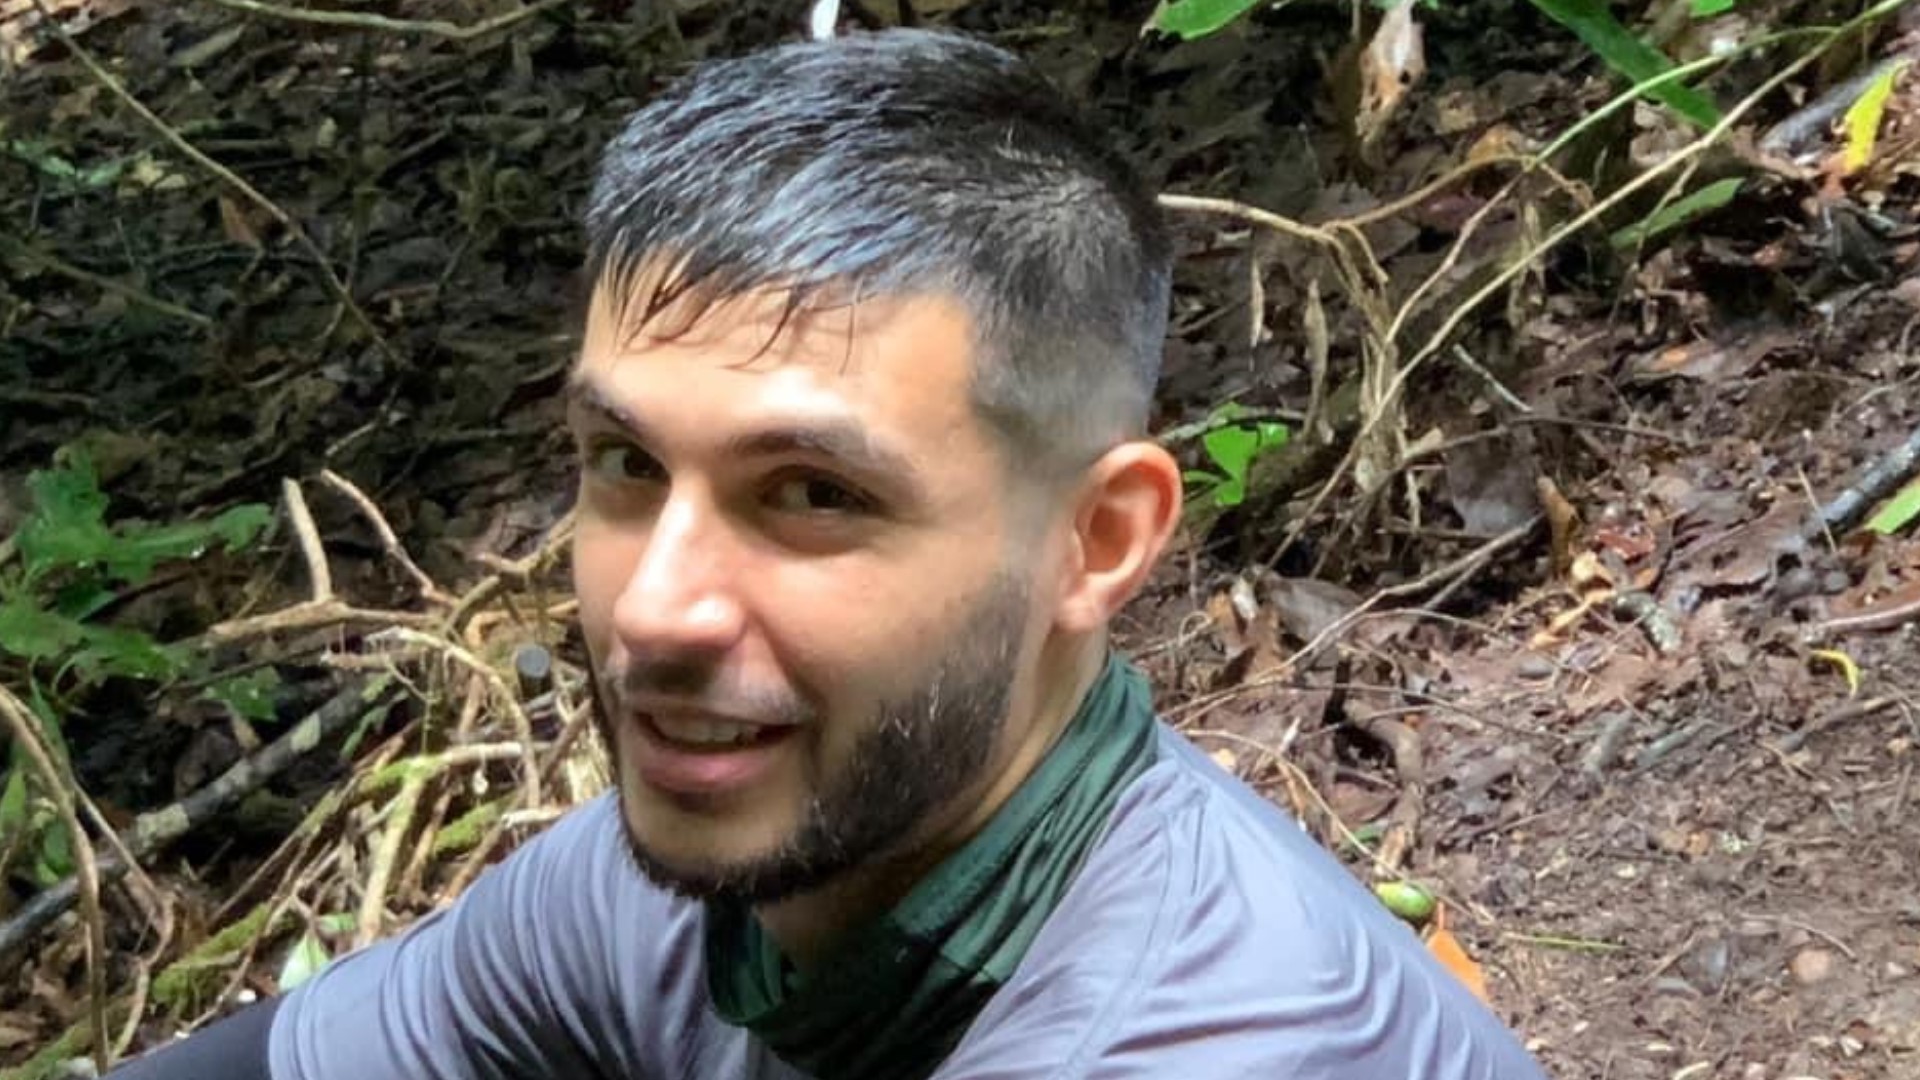 27-year-old Richard Gonzalez was last seen around noon on Monday while on a 76-mile hike from Oconee State Park to Table Rock State Park.